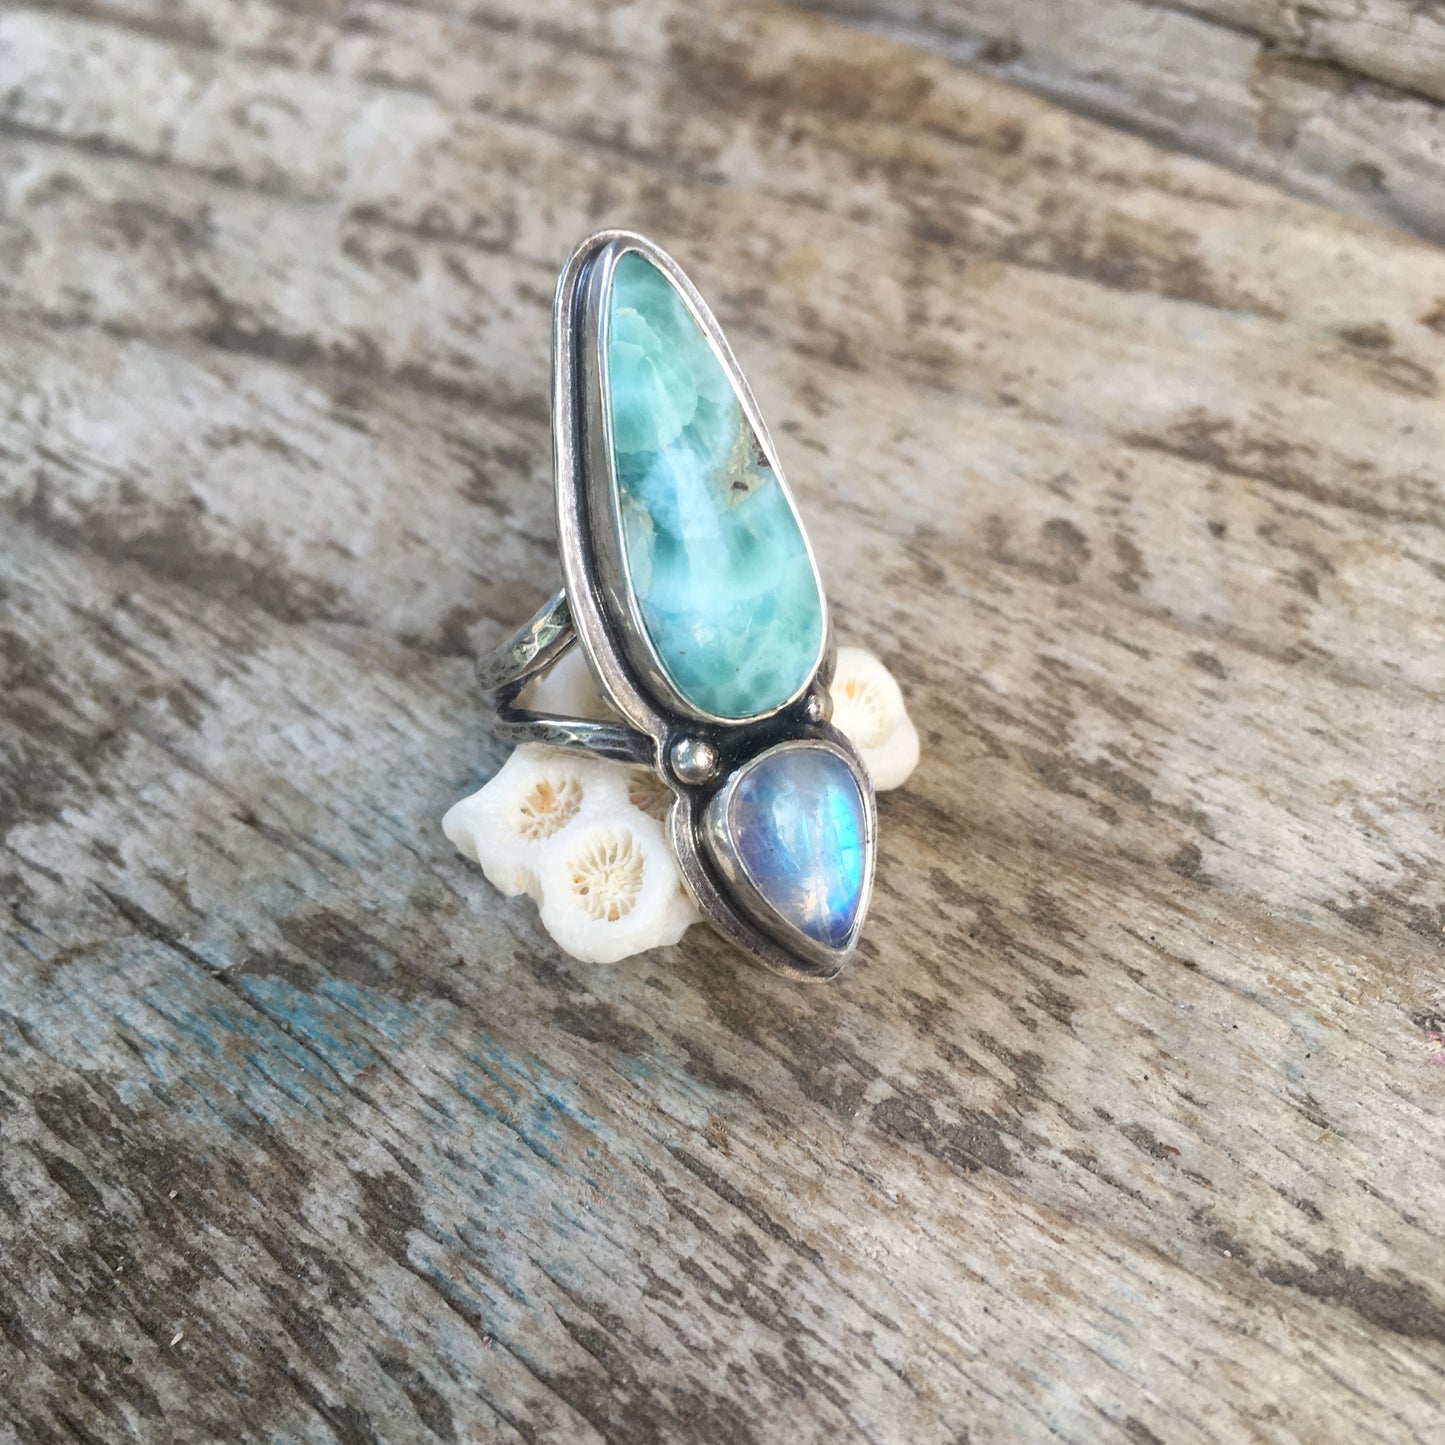 Double Amulet Ring with Larimar and Moonstone Shown on Angle